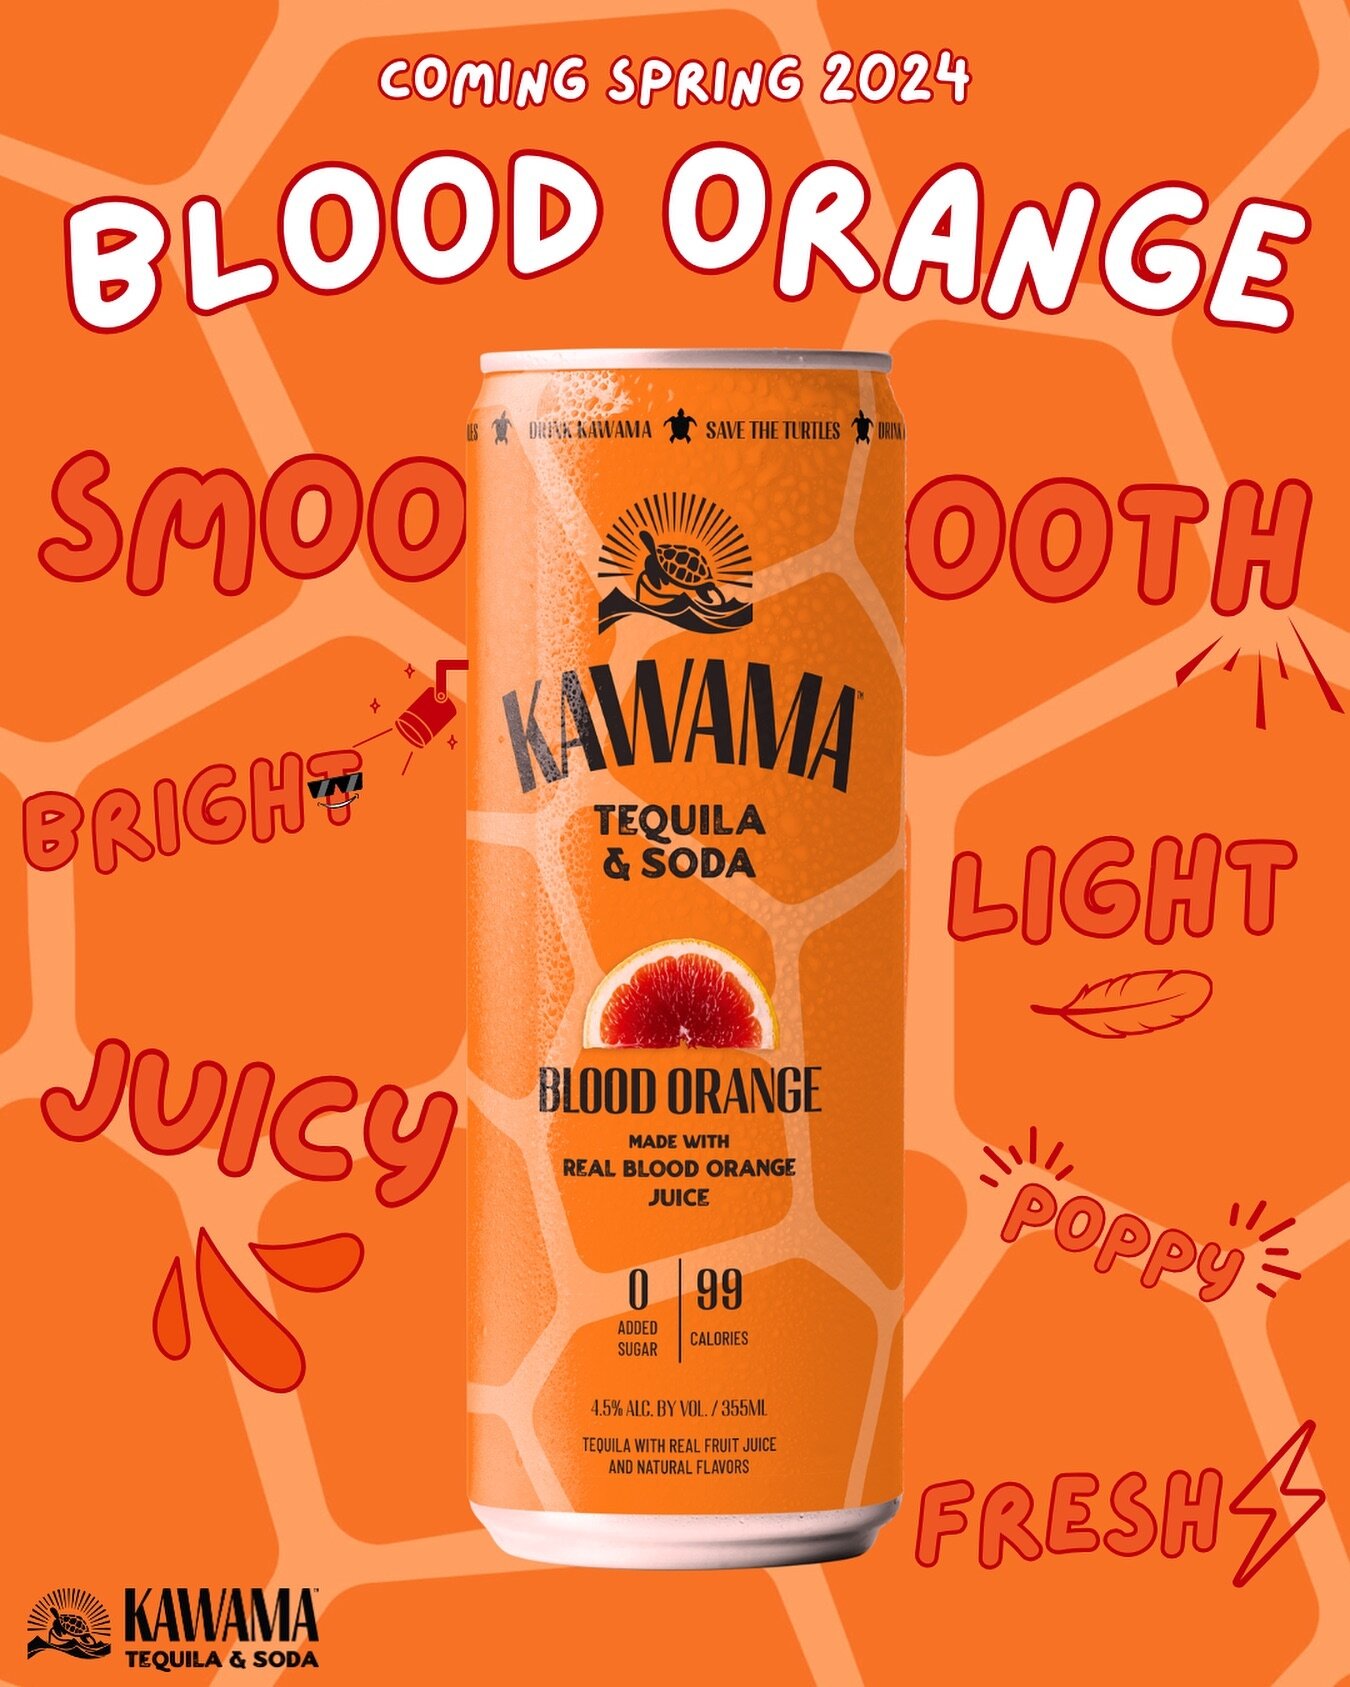 We are thrilled to be launching new products this spring 🍊! Introducing Kawama Tequila &amp; Soda Blood Orange! A bright, poppy, and fresh new twist to round out our current citrus line🍋

Made with blanco tequila, blood orange juice, no added sugar